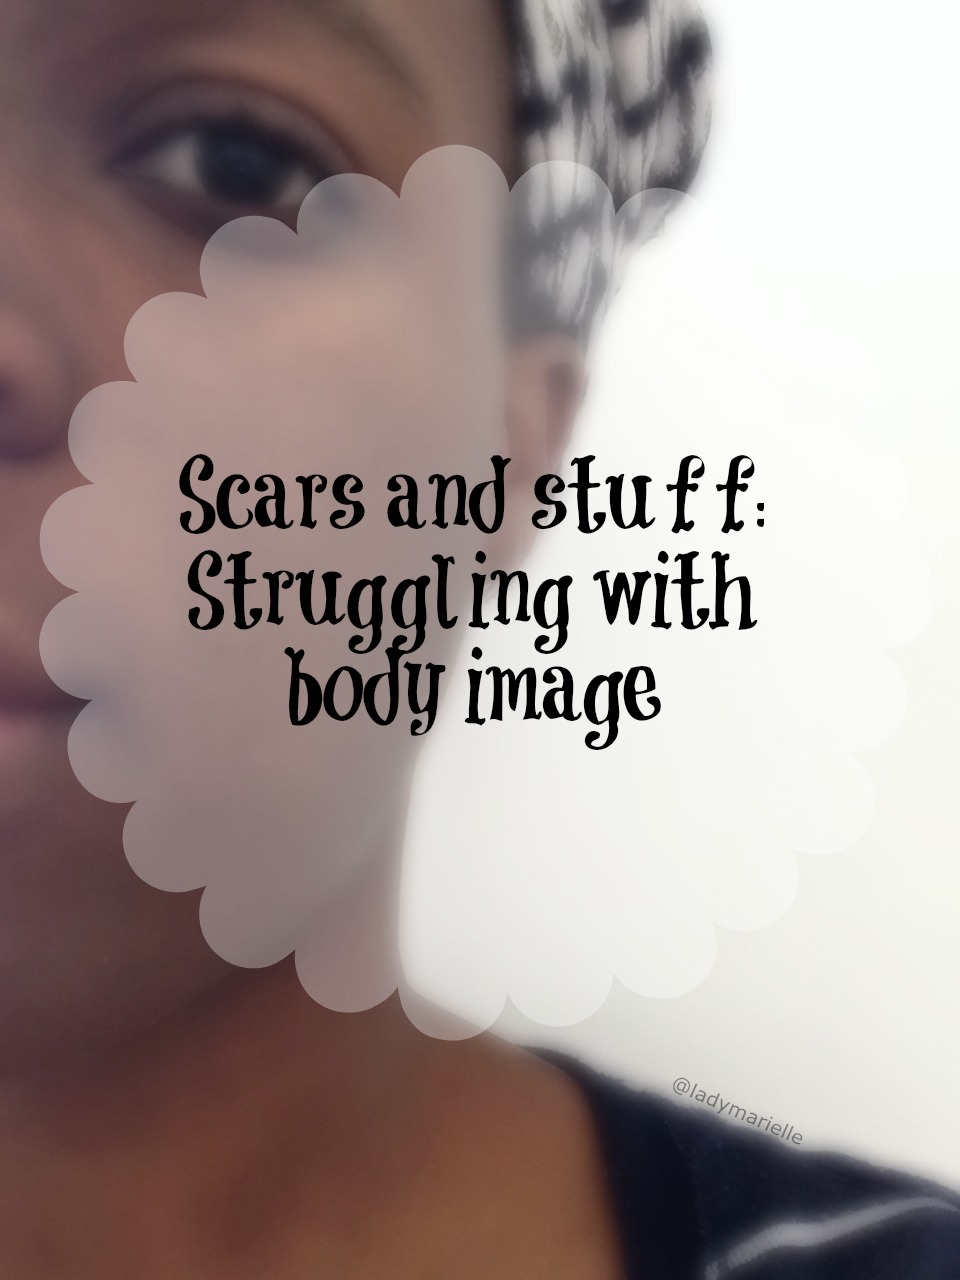 Scars and stuff. Struggling with body image